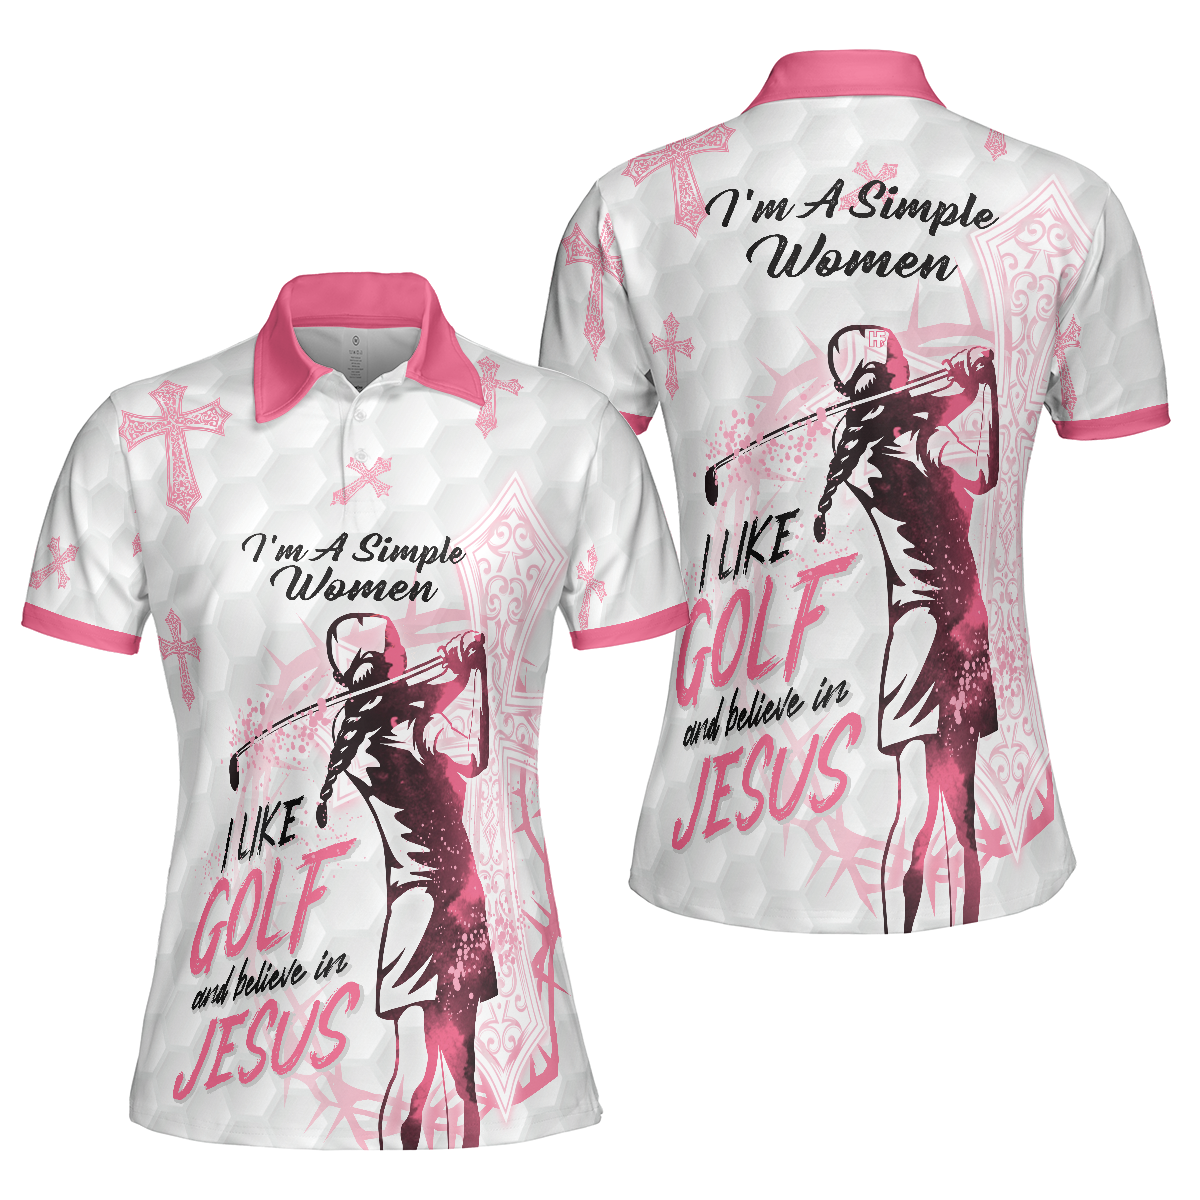 Golf and Jesus Women Polo Shirt, I'm A Simple Women I Like Golf And Believe In Jesus Short Sleeve Women Polo Shirt, Best Golf Shirt For Ladies